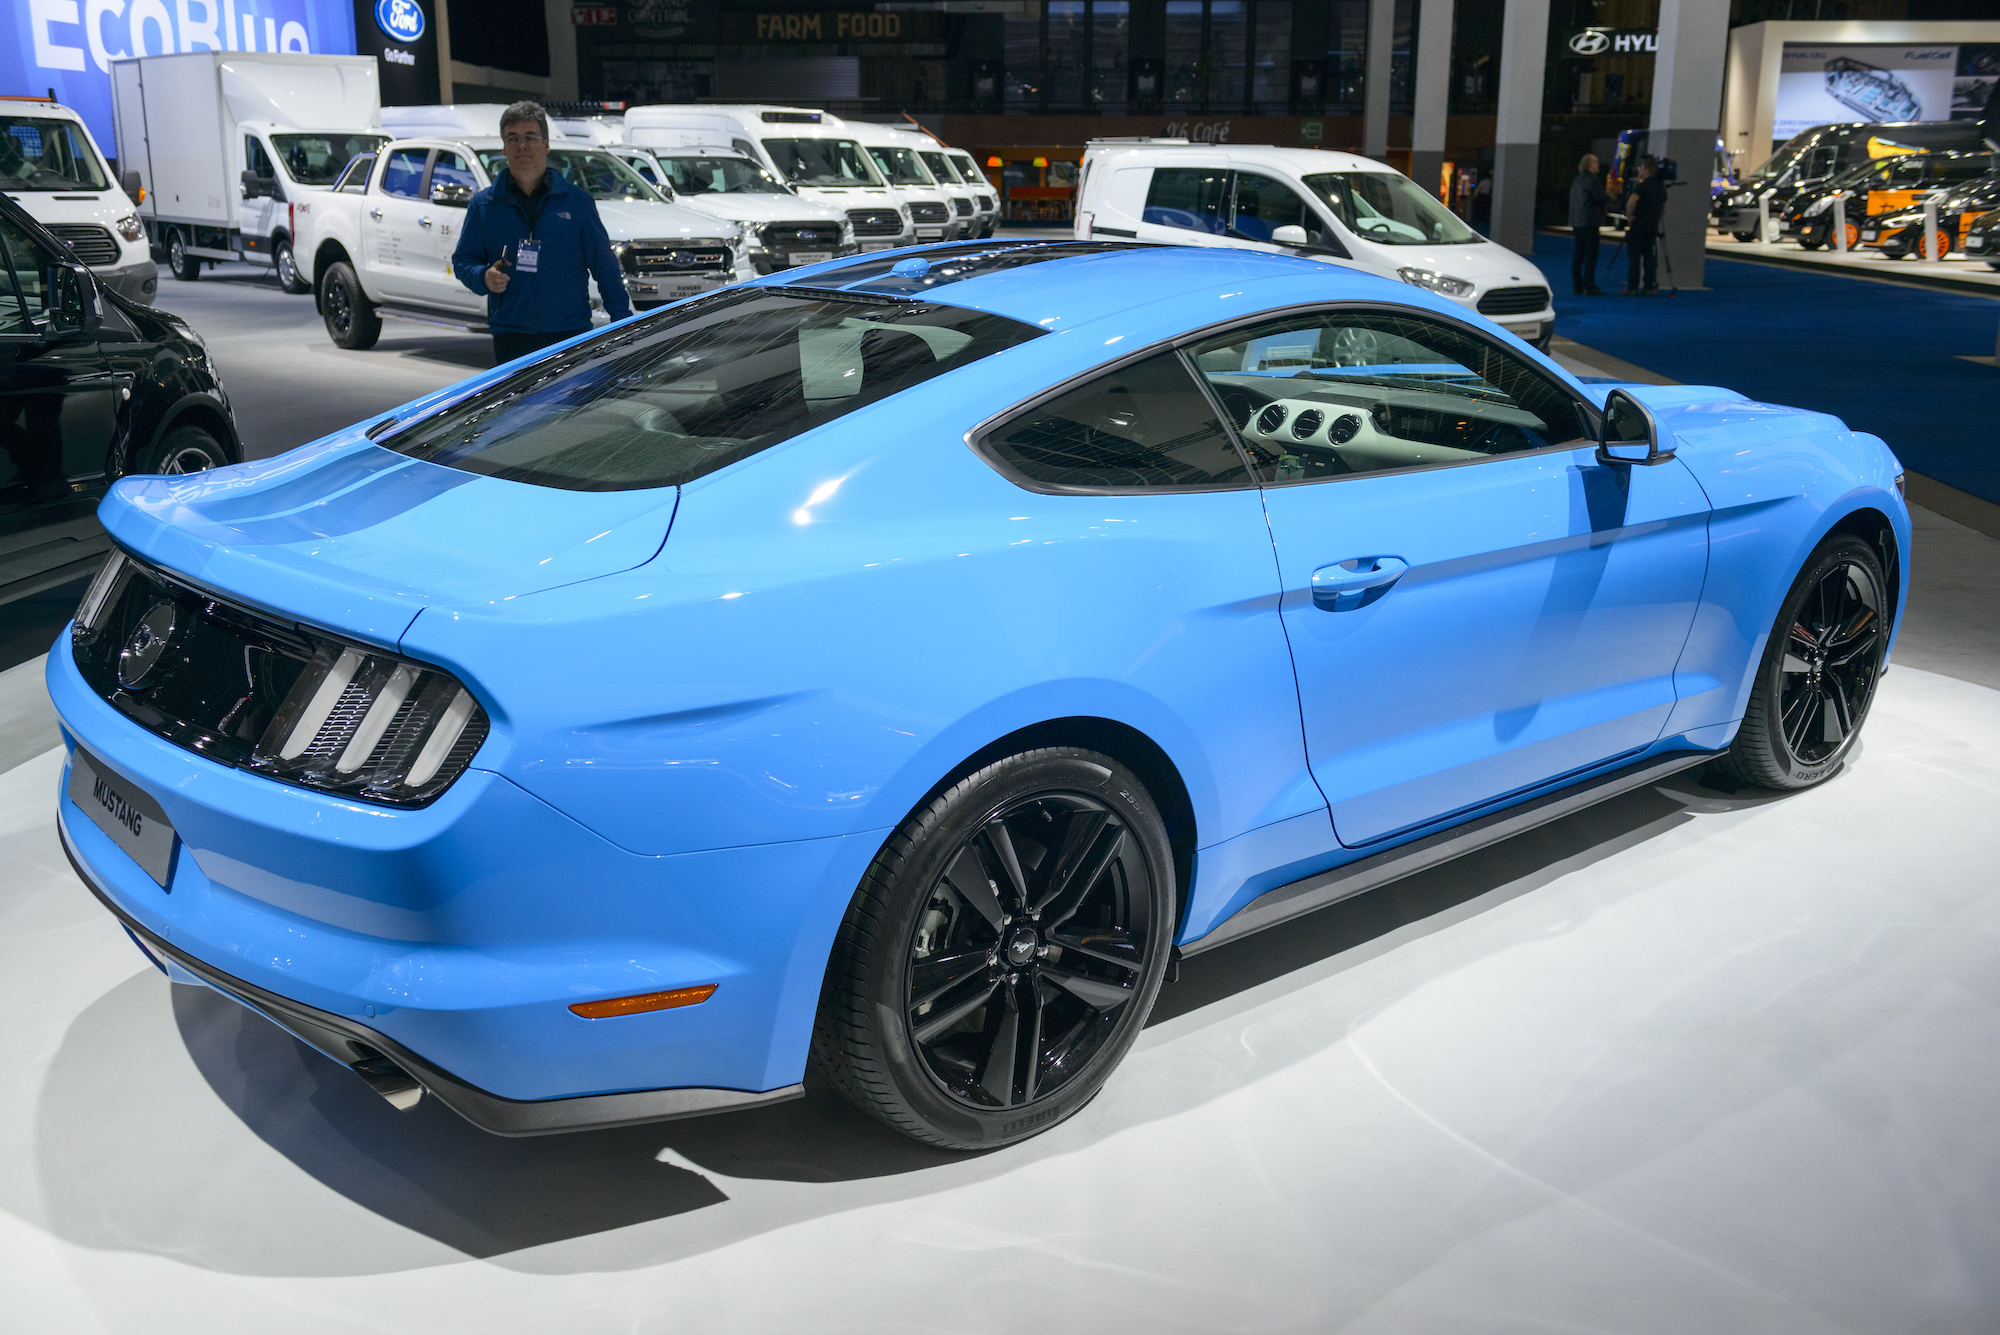 A blue 2017 Ford Mustang on display at Brussels Expo on January 9, 2017, in Brussels, Belgium.